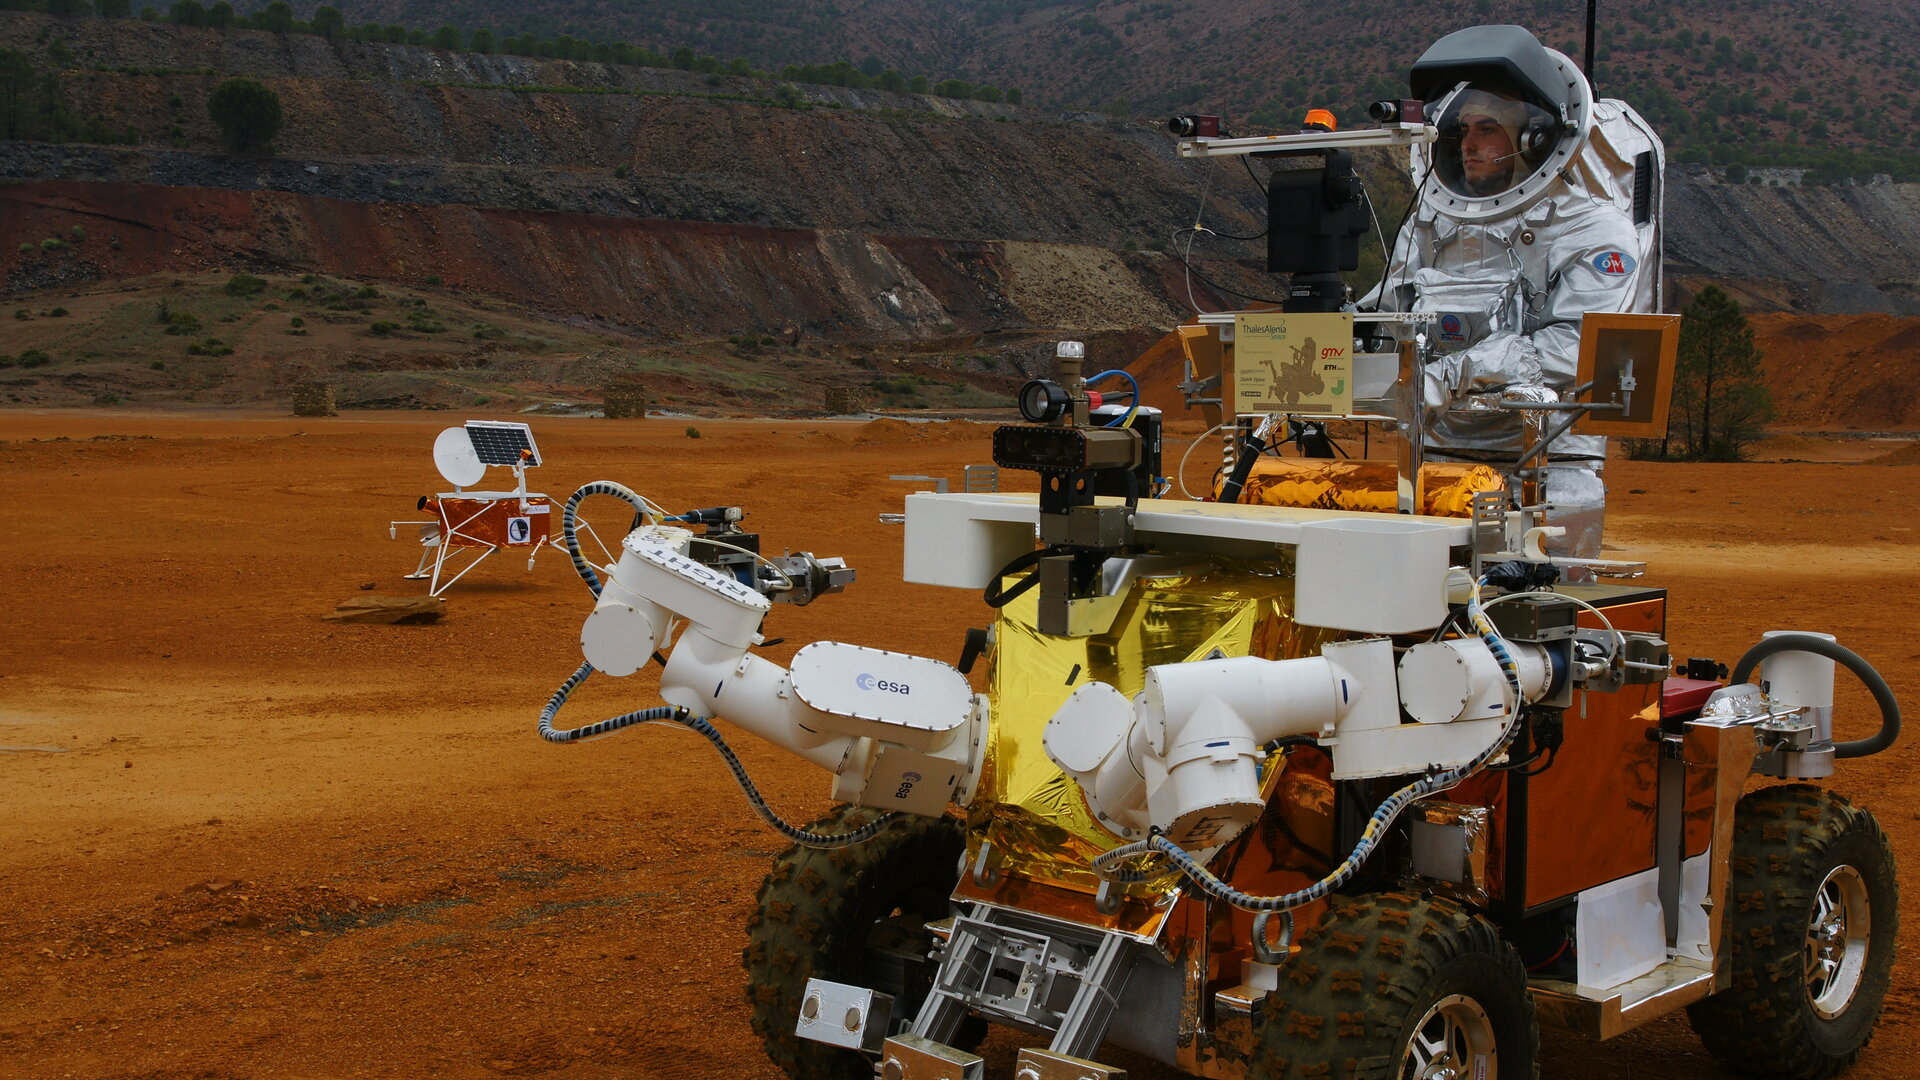 'Astronaut' at the controls of the Eurobot Ground Prototype